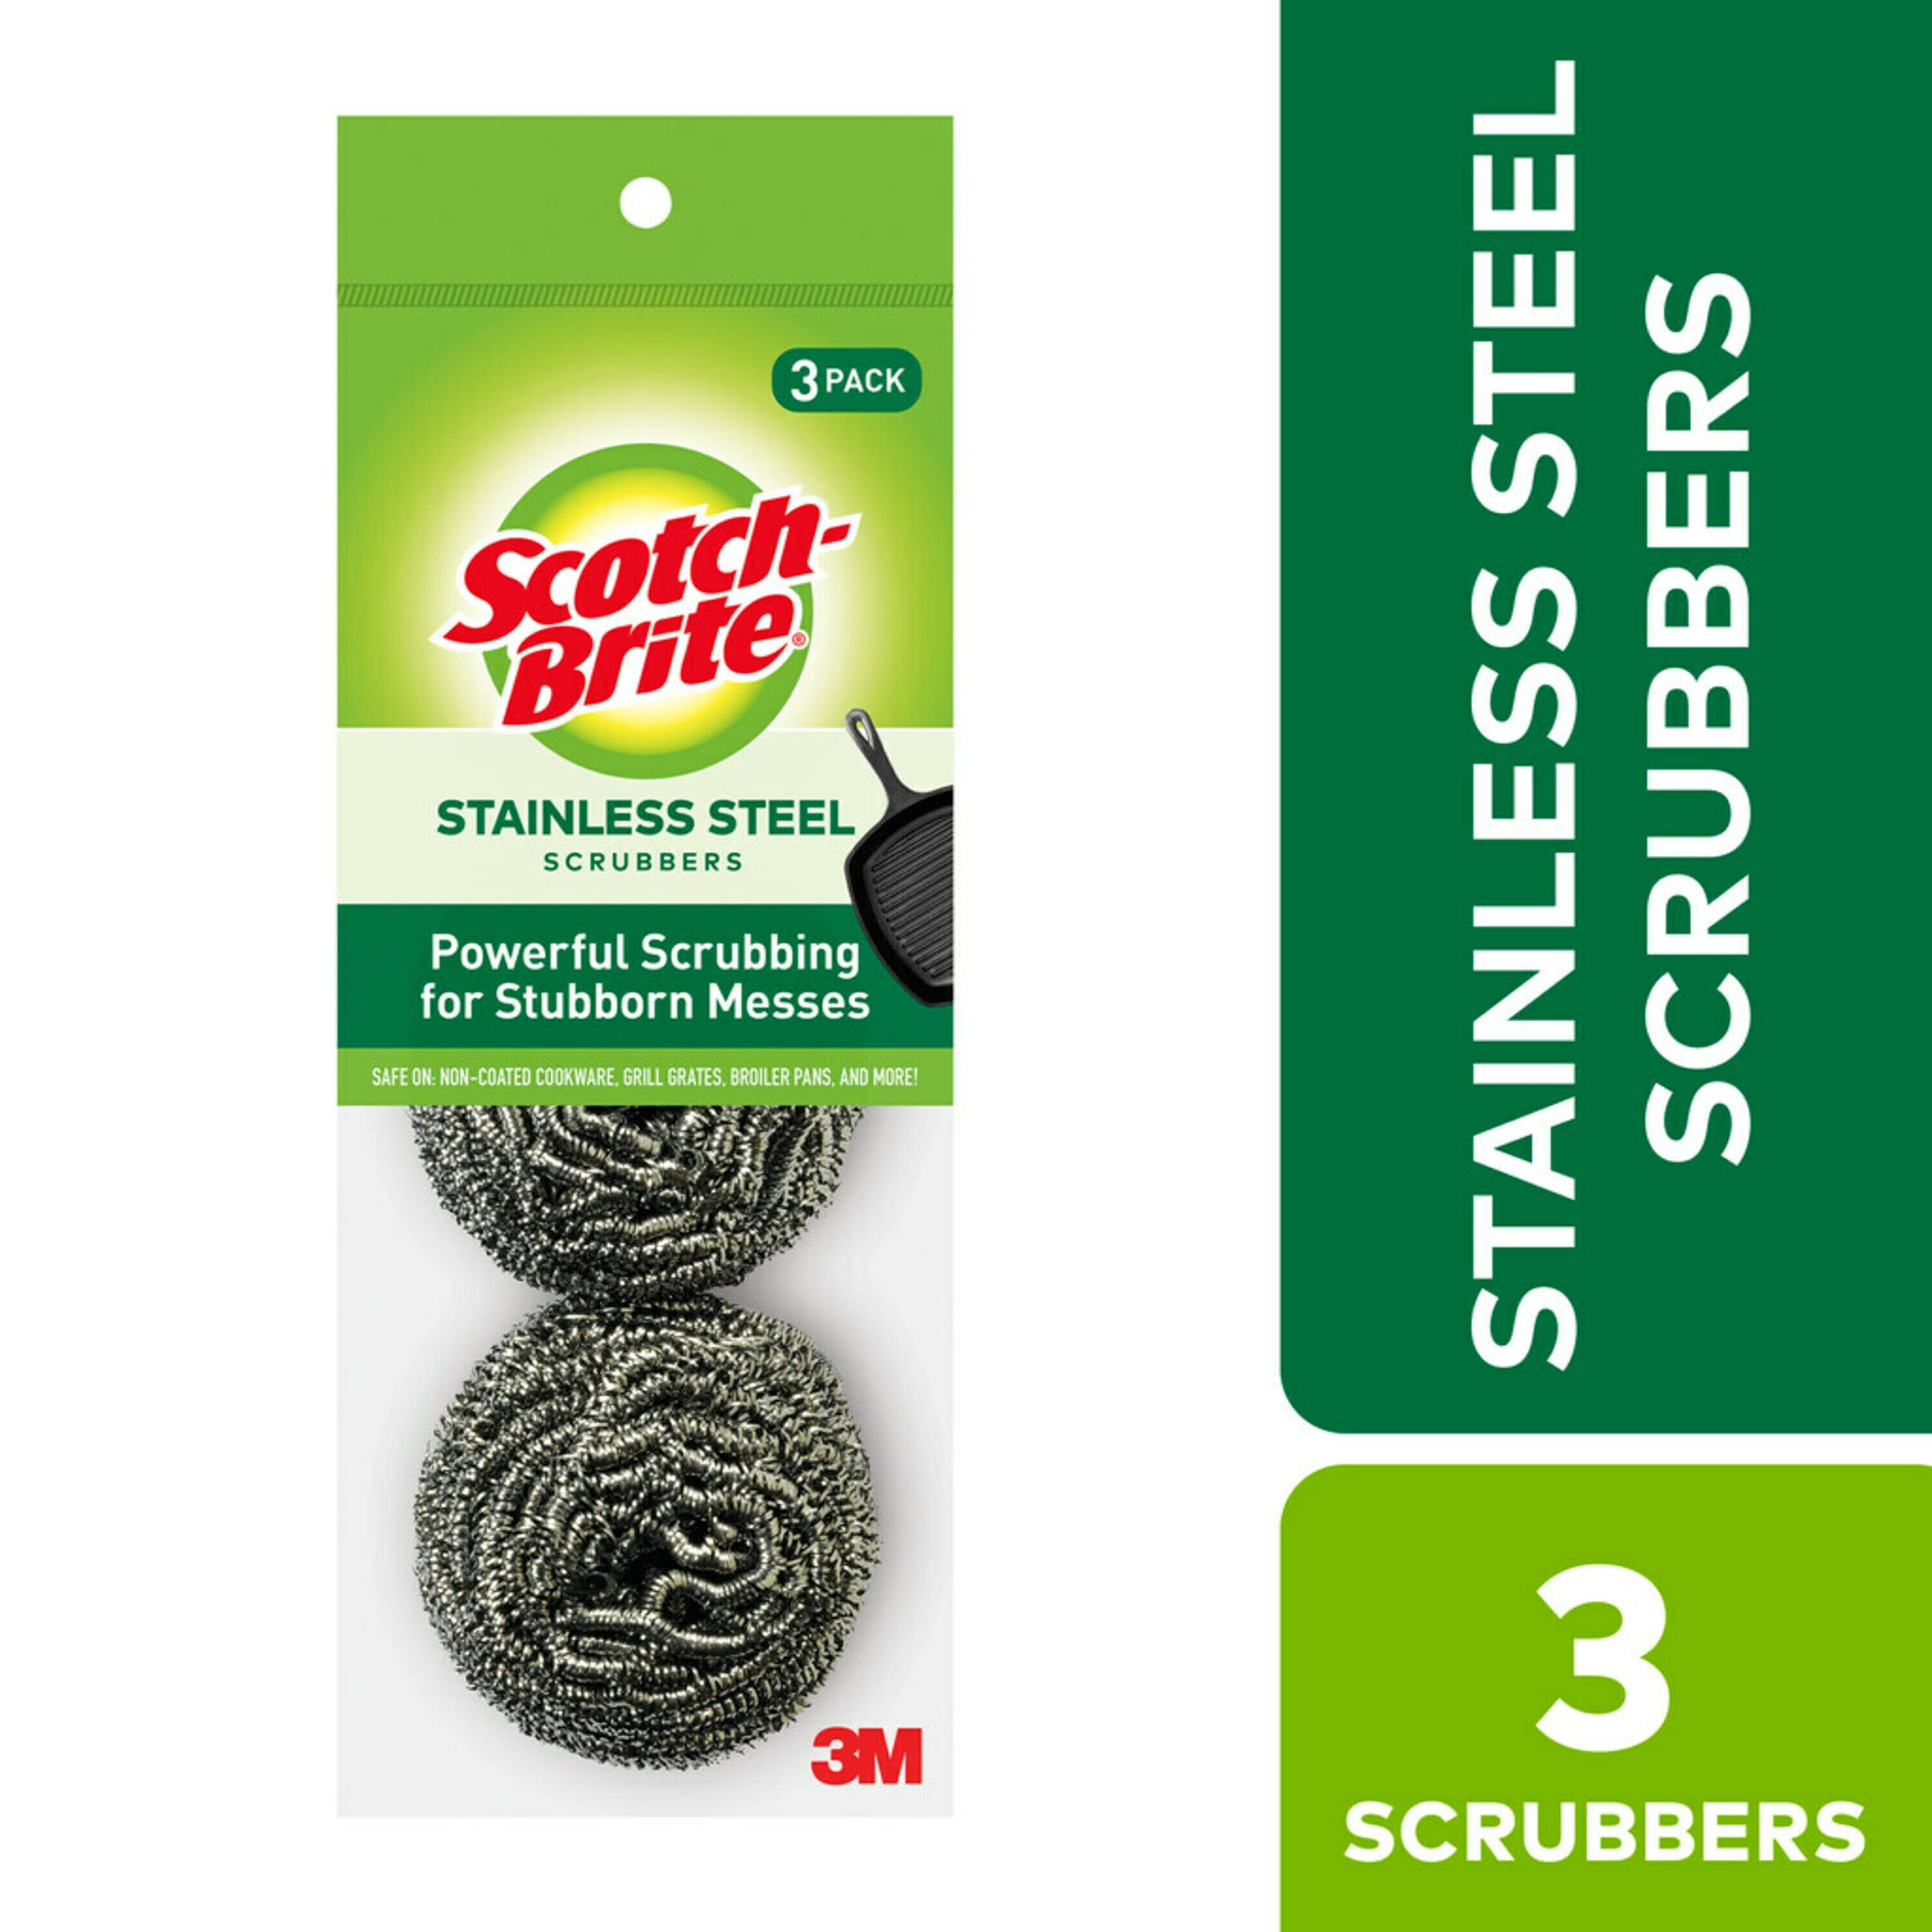 Scotch-Brite Sponge with scouring pad Polymer Foam Sponge with Scouring Pad  (2-Pack) in the Sponges & Scouring Pads department at